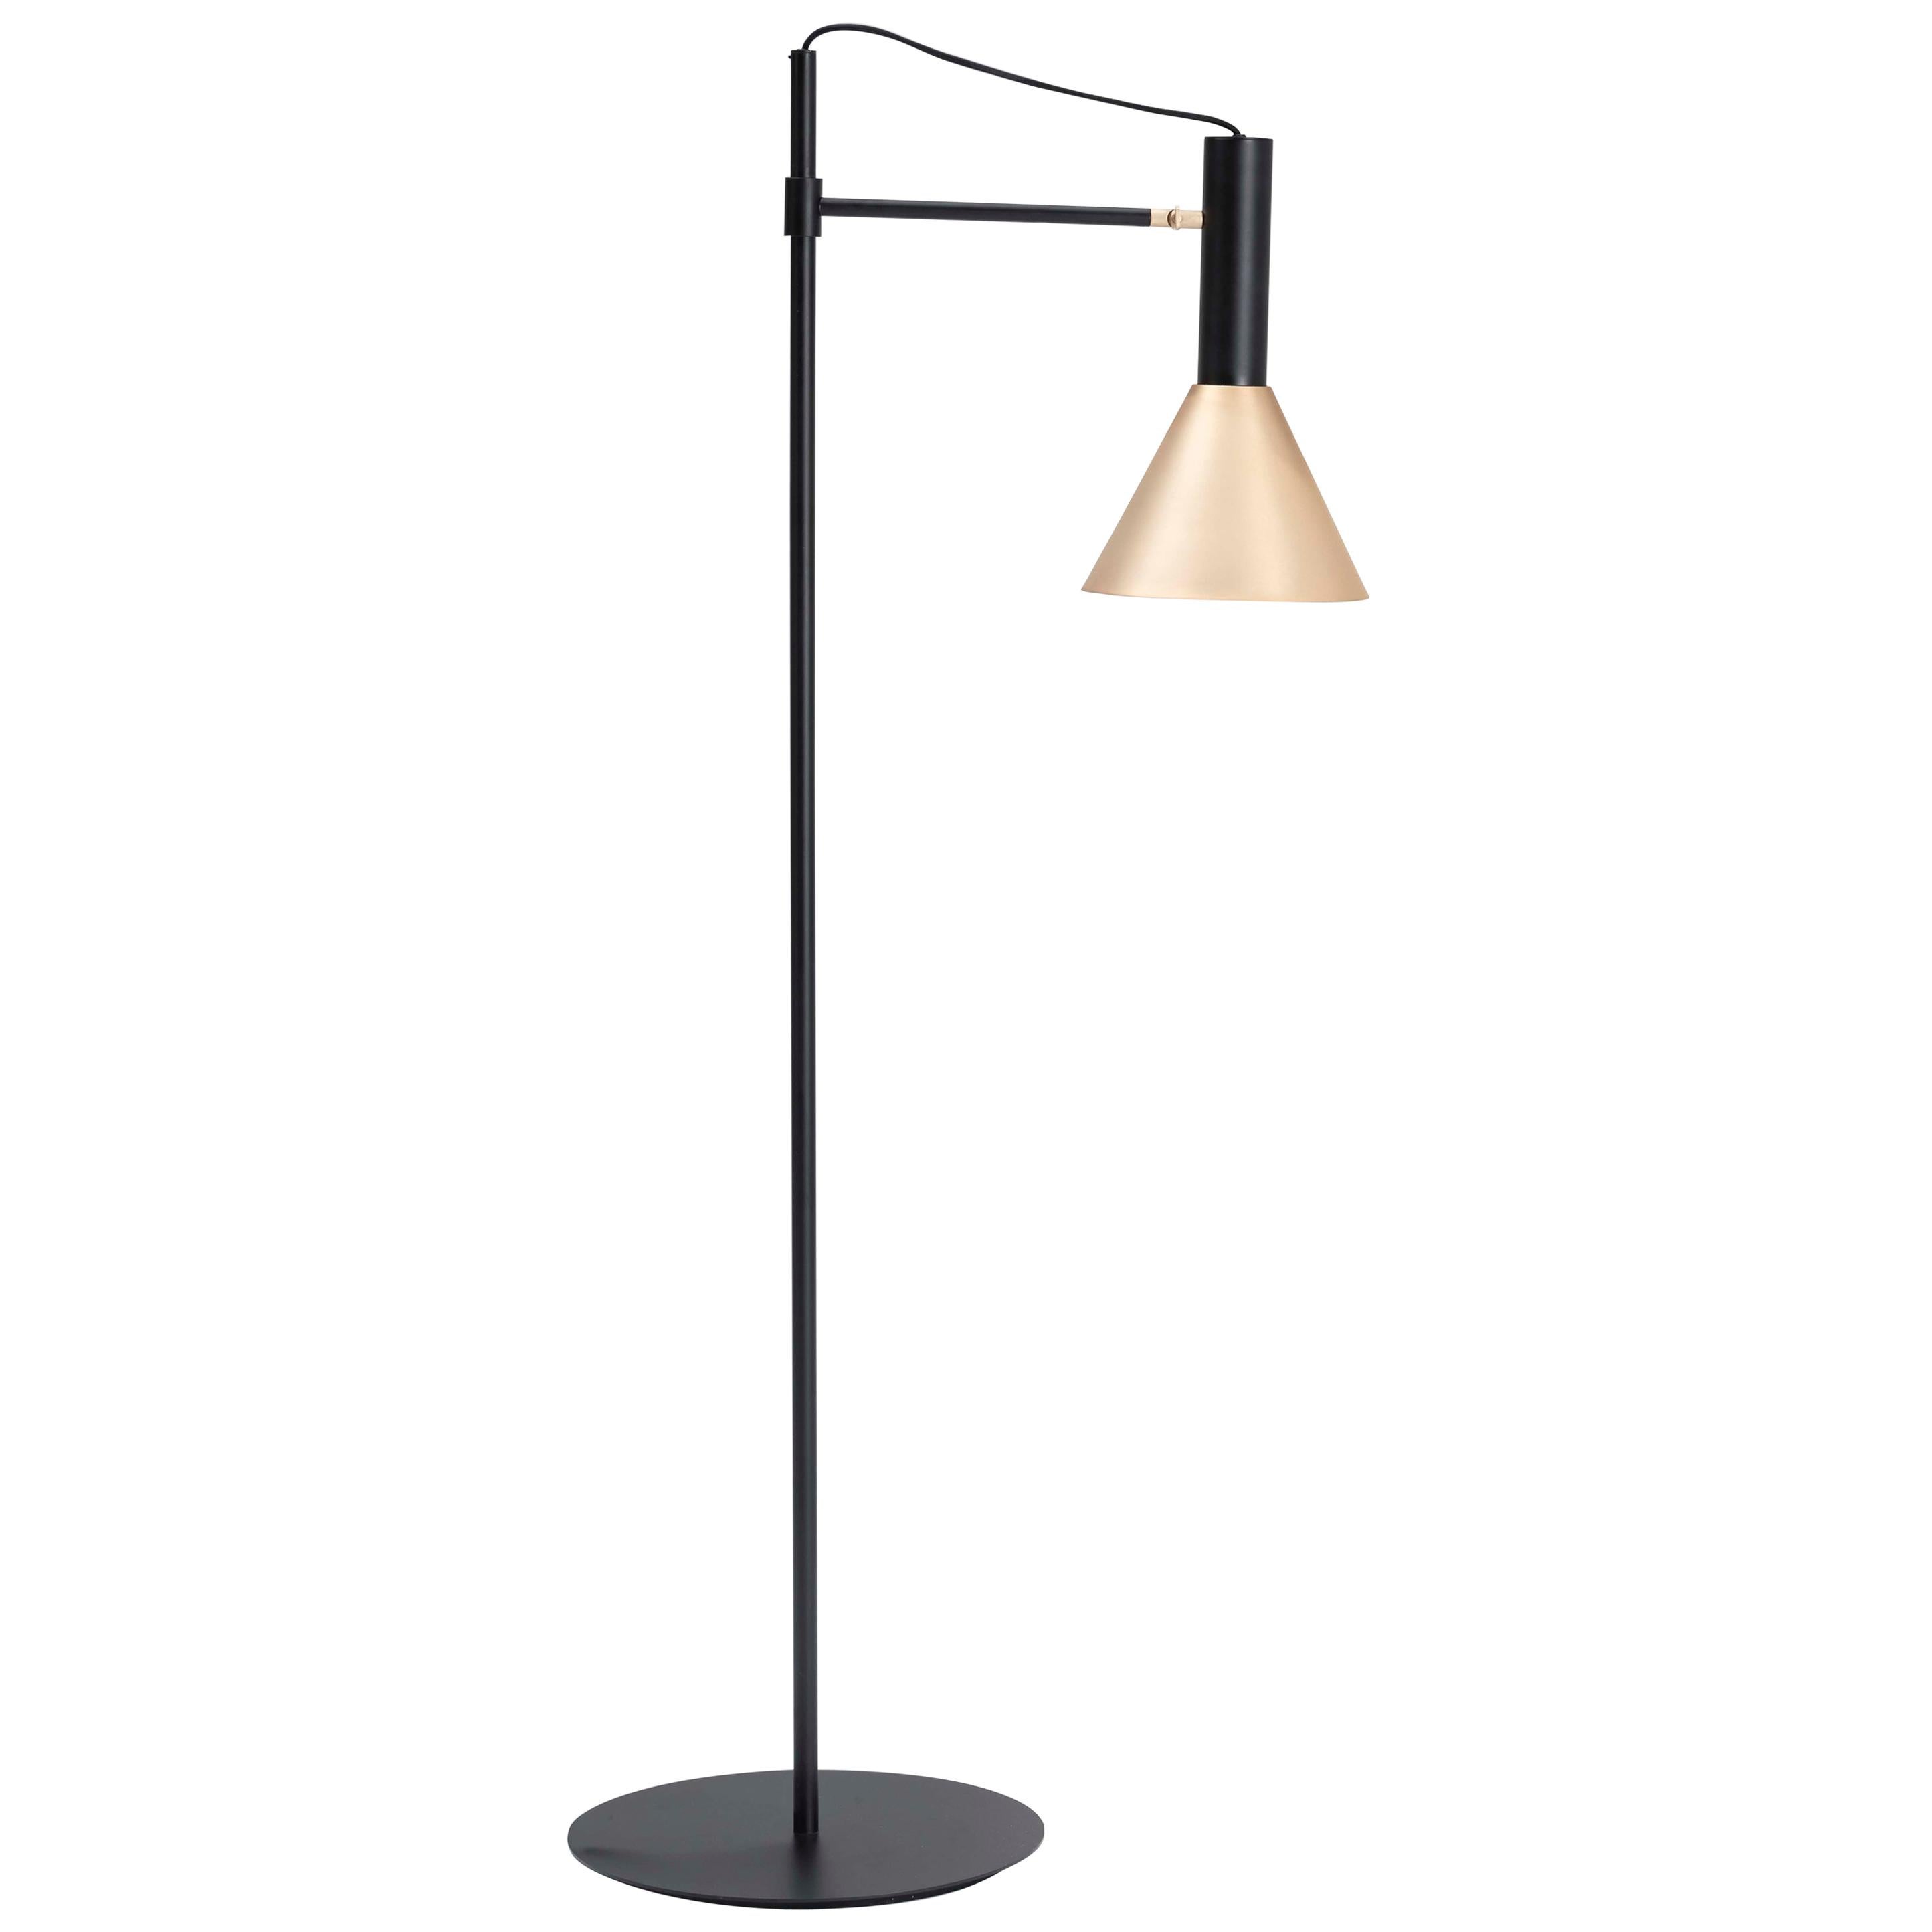 21st Century Created by William Pianta Sabeen Decor Floor Lamp Brushed For Sale